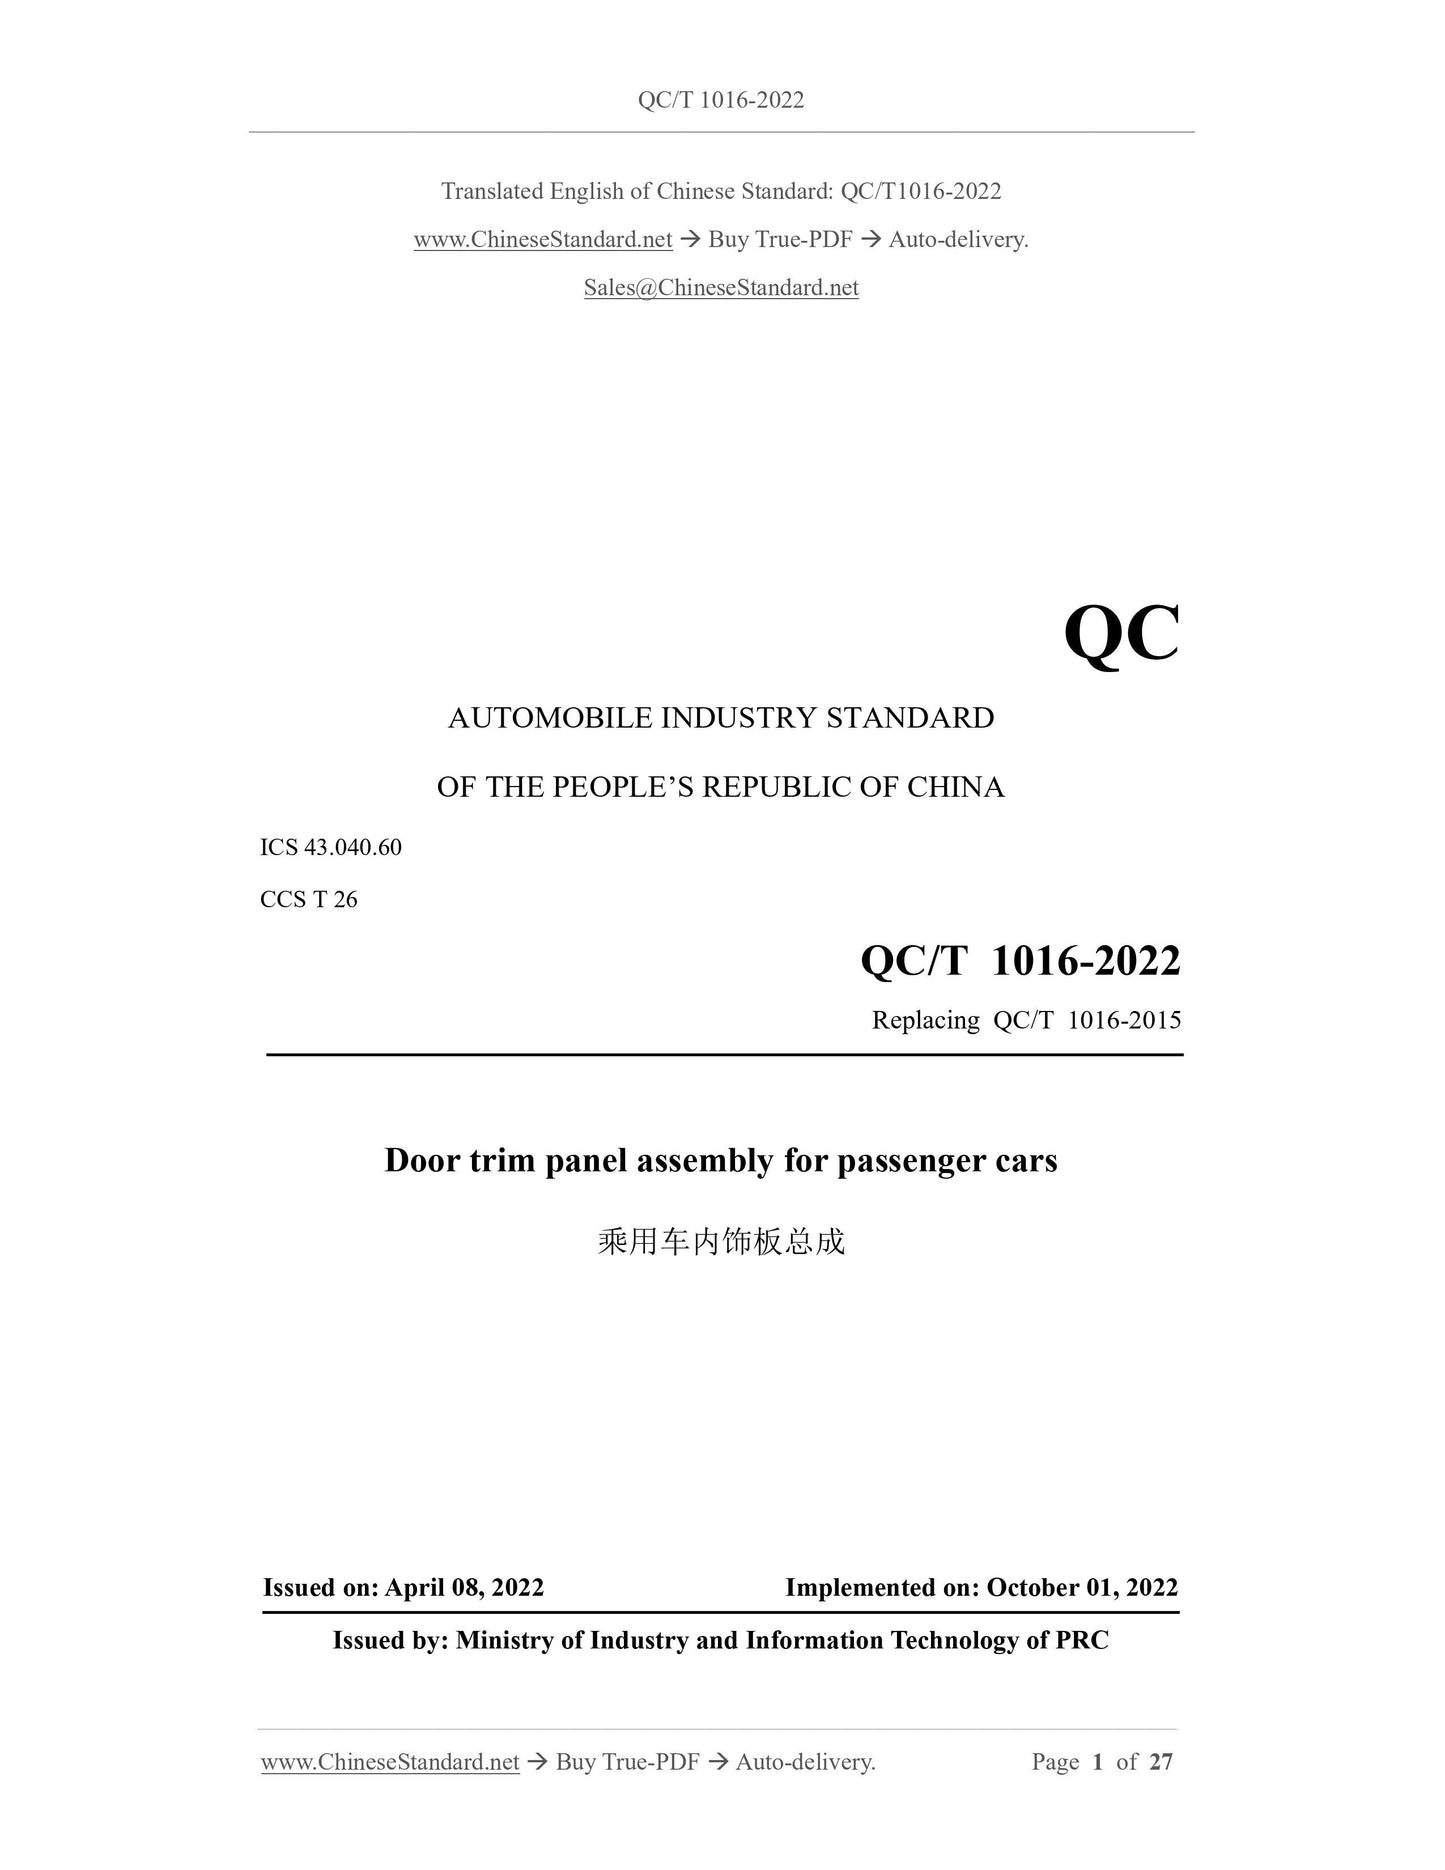 QC/T 1016-2022 Page 1